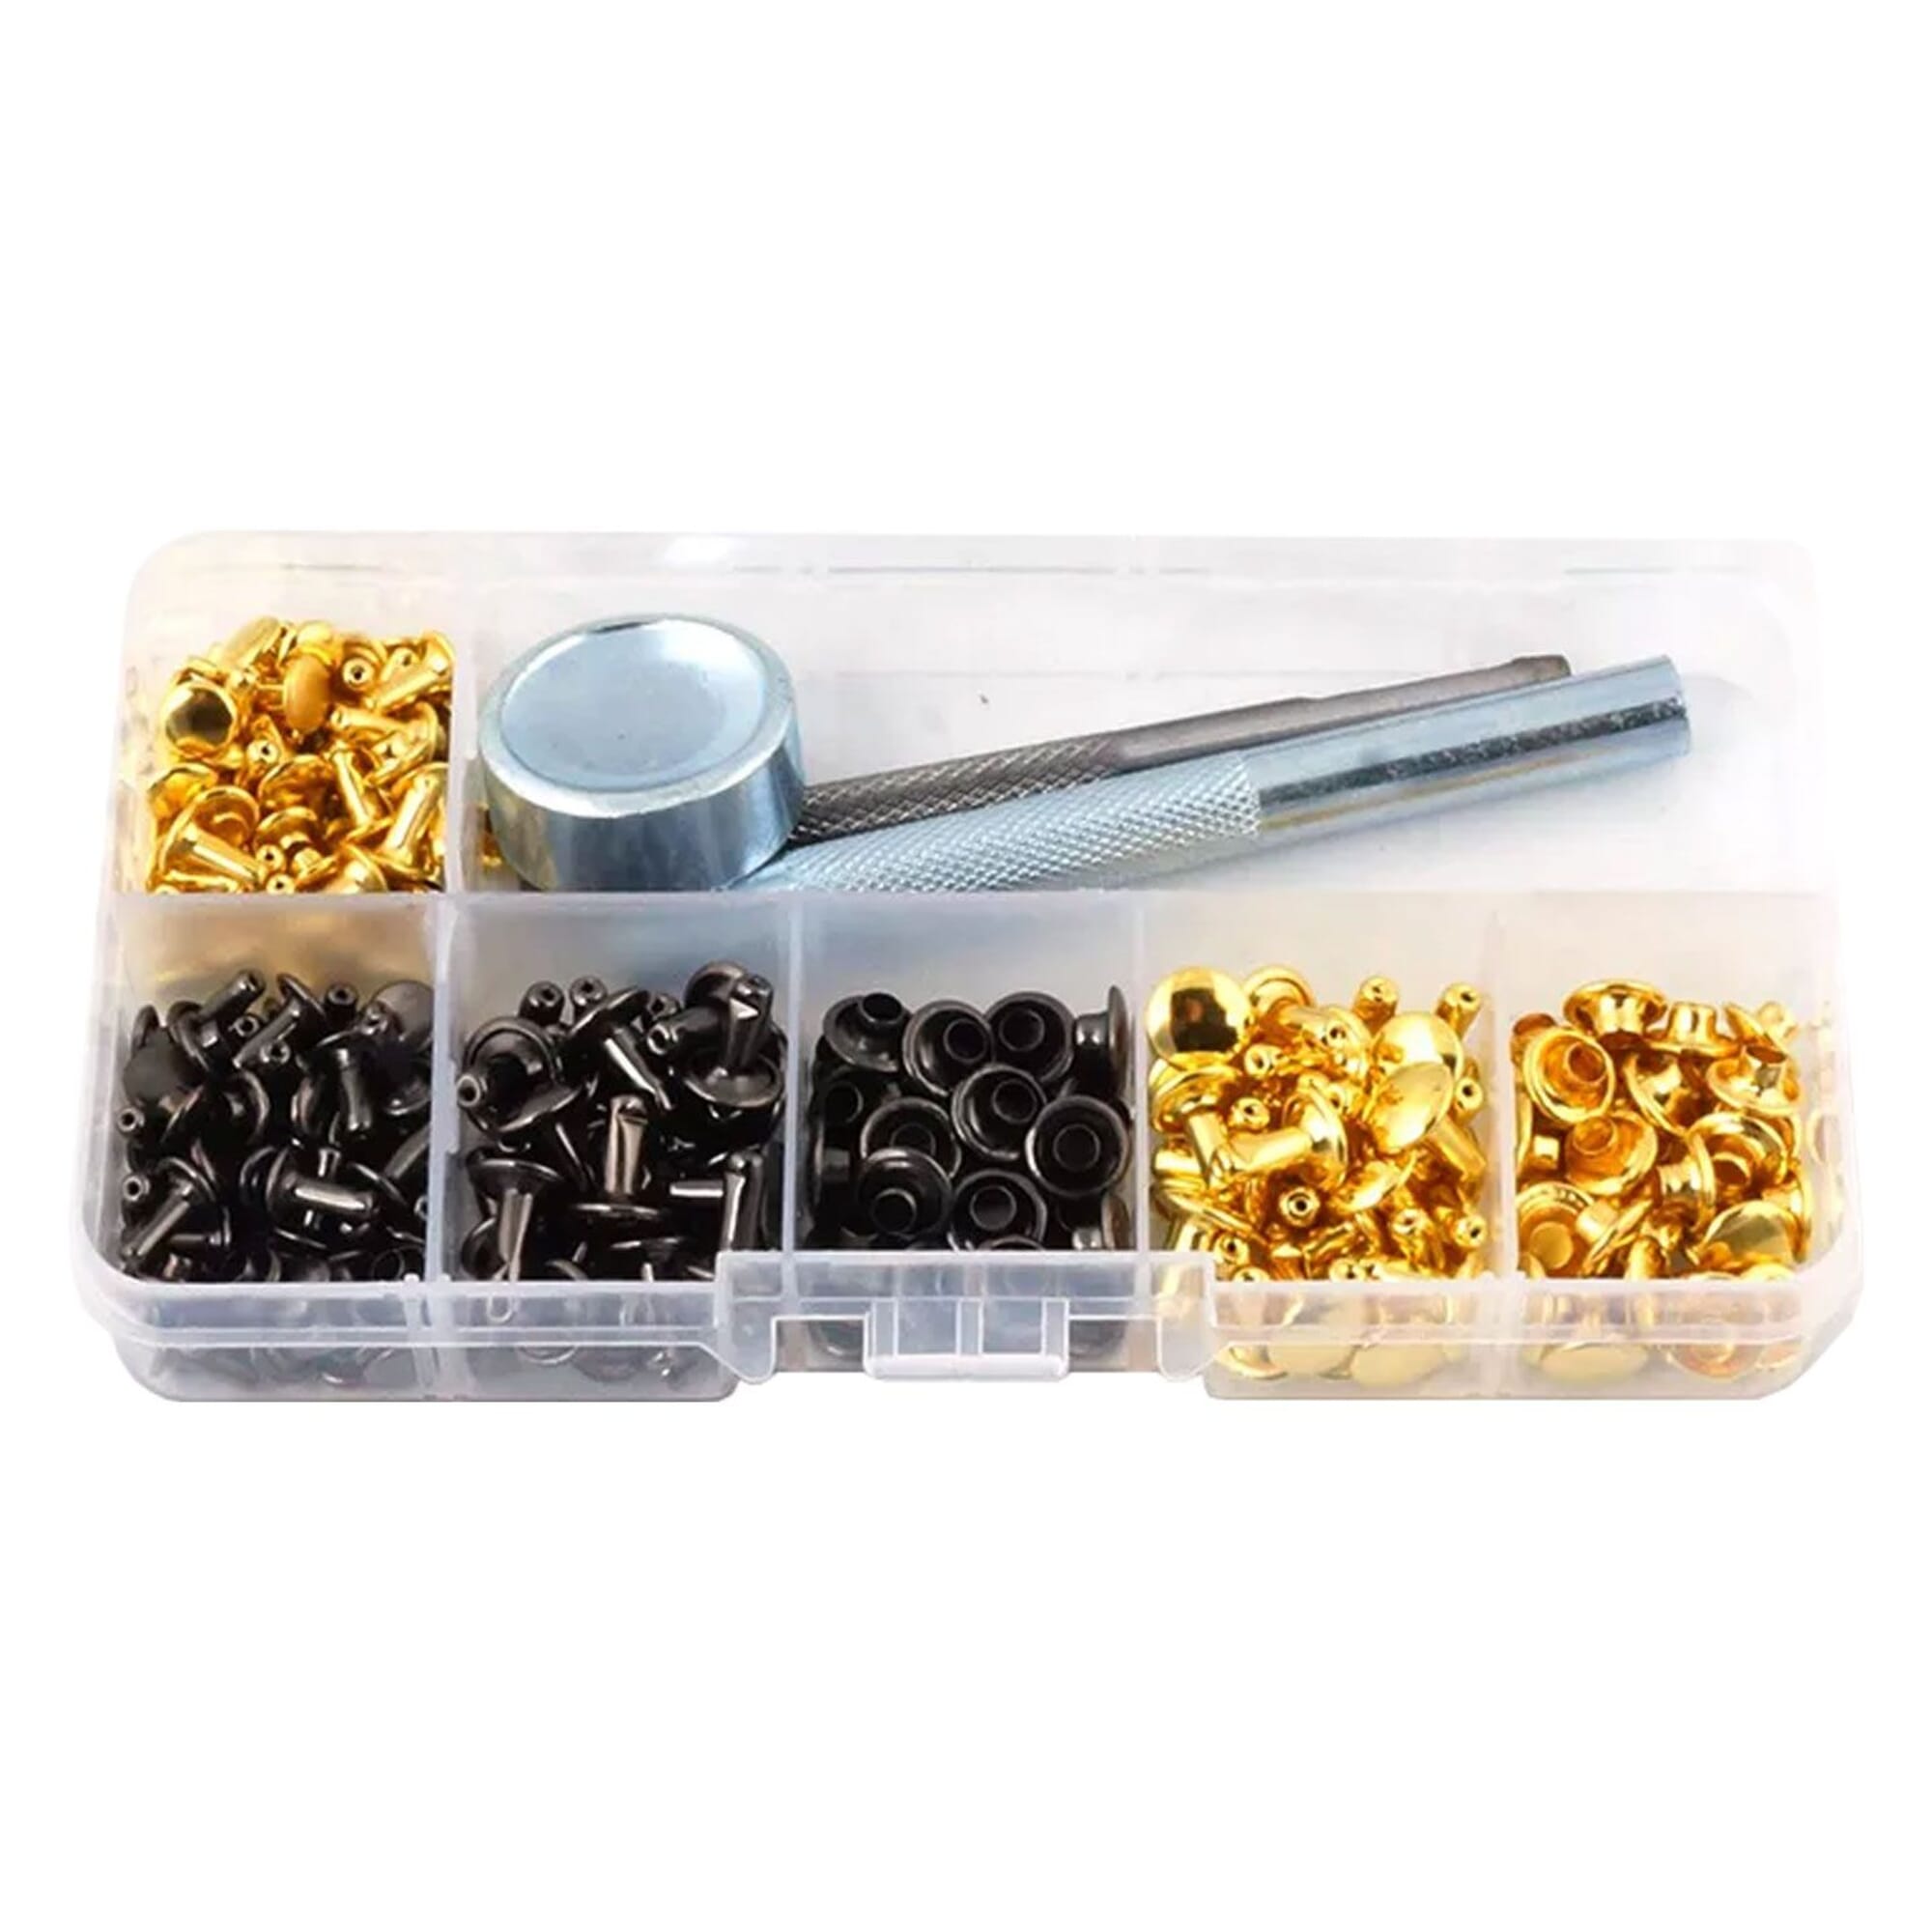 Leather Rivets Leather Snaps And Rivets Rivets Leather Rivet Tool Leather  Rivet Kit 120 Sets Crafts for DIY Leather Decoration